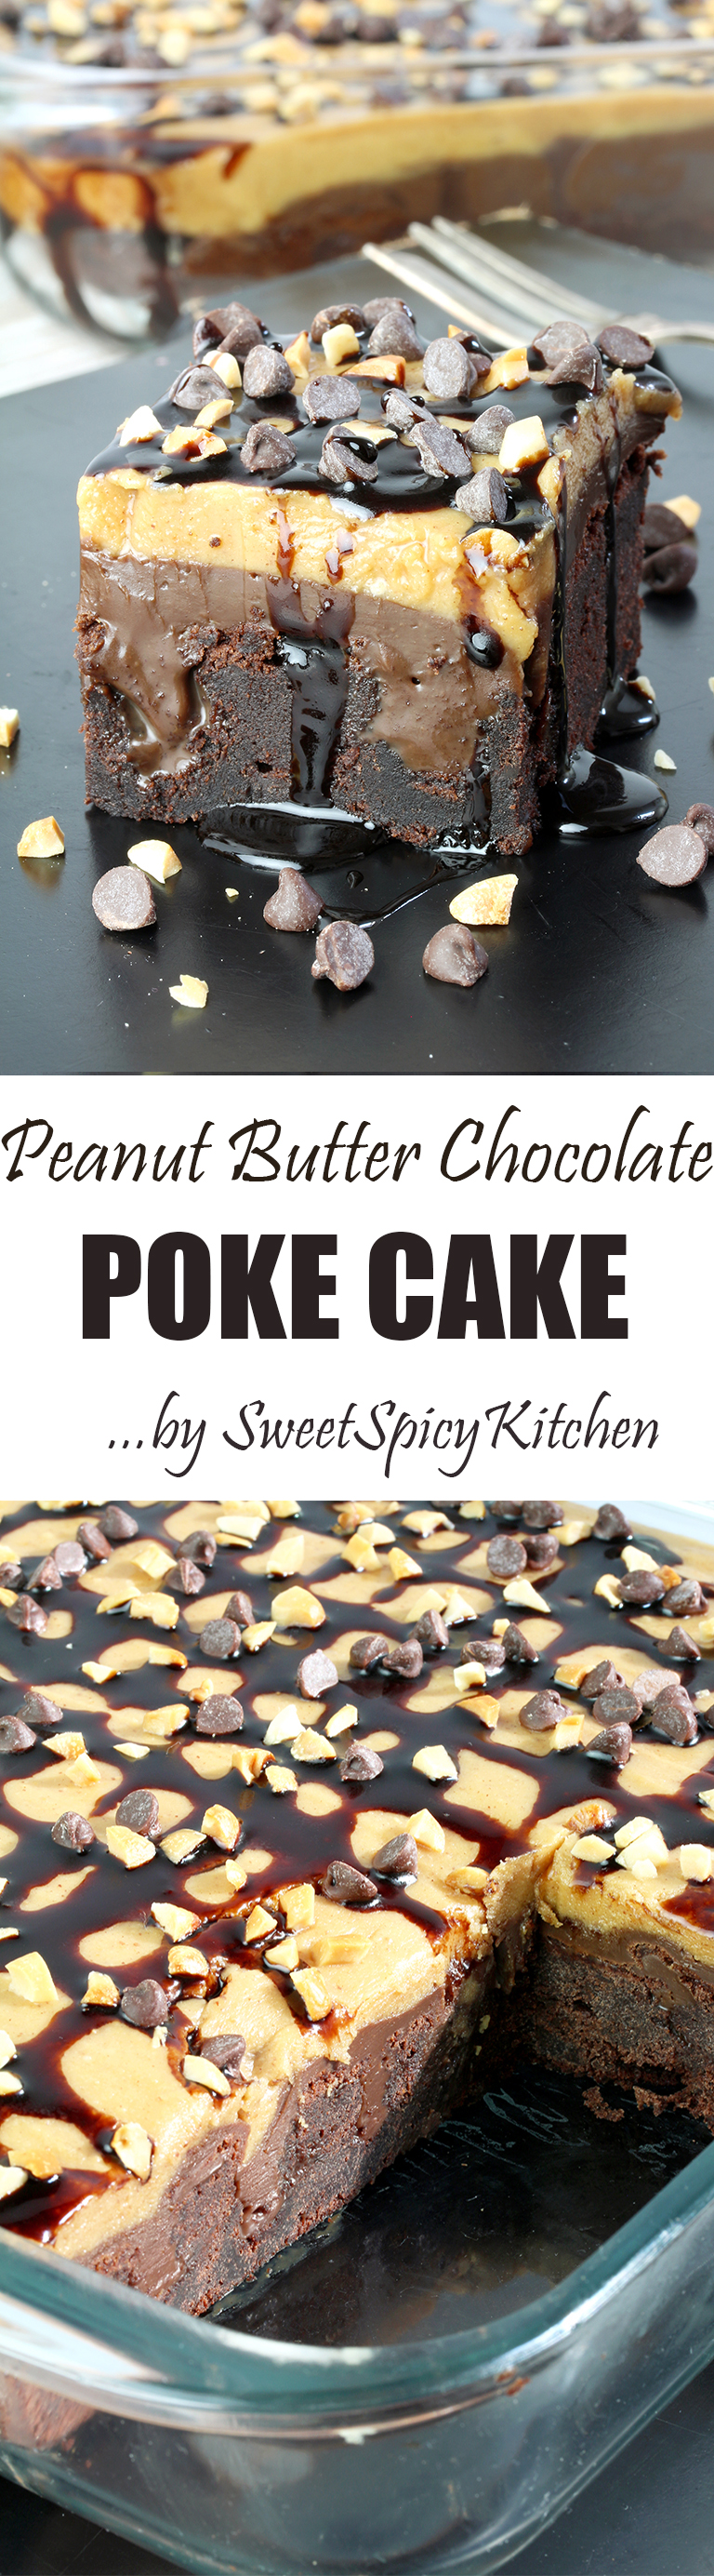 Here is the recipe for perfectly tasty Peanut Butter Chocolate Poke Cake. It takes a special place in my cookbook. 